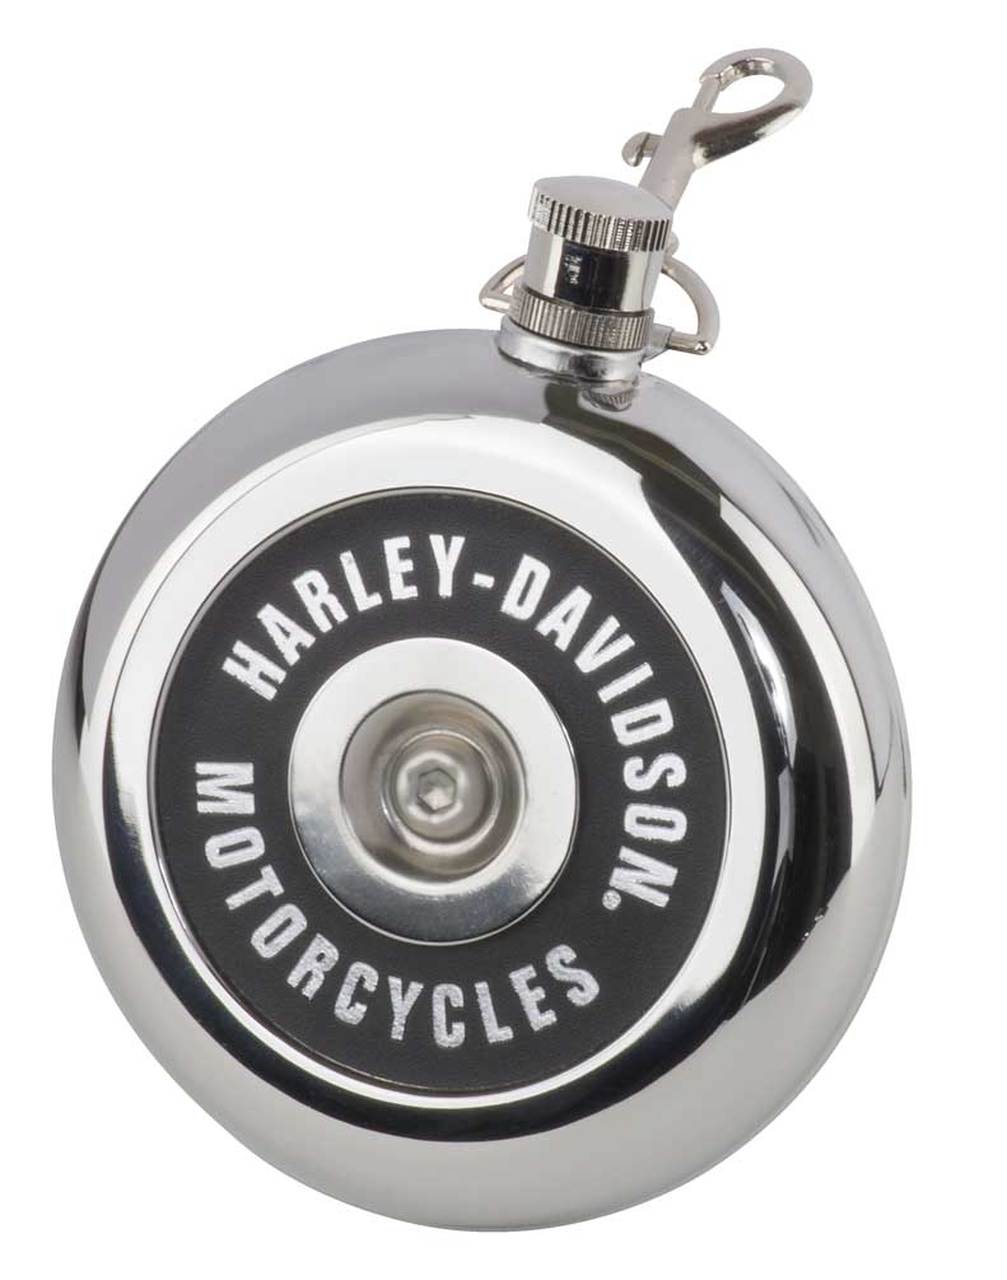 Harley-Davidson® Air Cleaner Style Round Flask, 8 oz. - Silver Stainless Steel